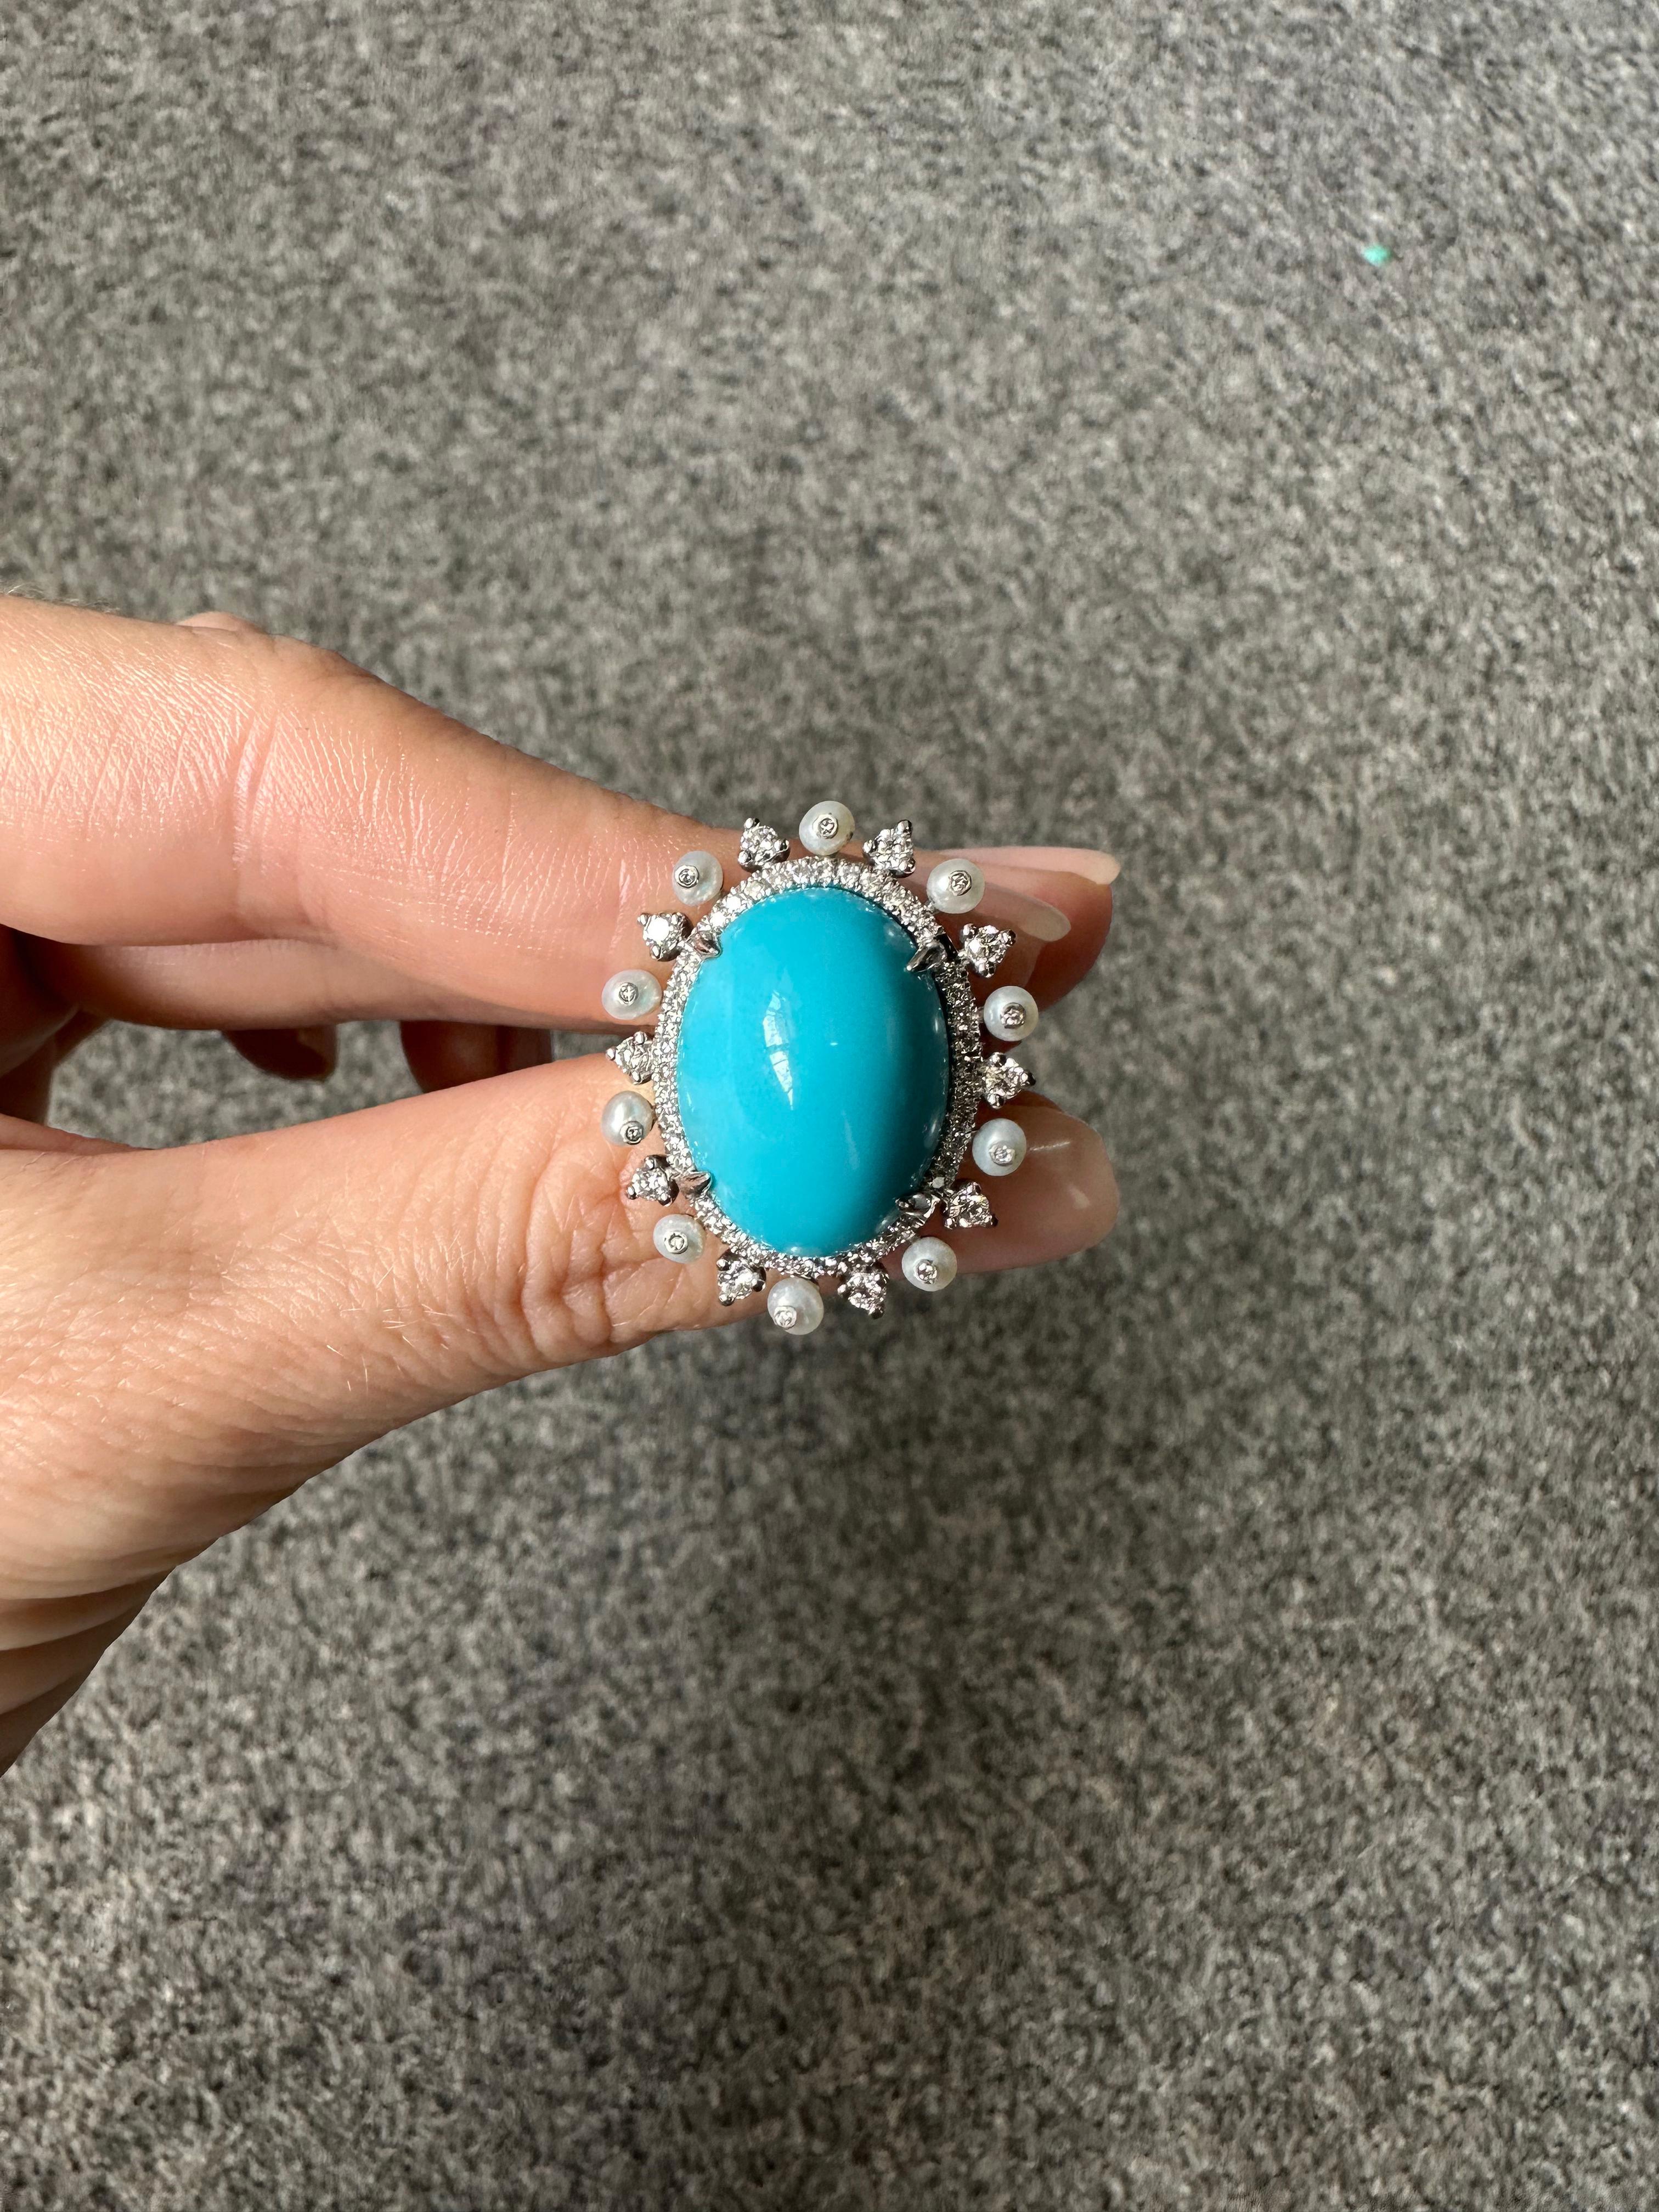 a beautifully handcrafted 10.92 carat Arizonian Turquoise and Pearl Ring, with White Diamonds surrounding the Turquoise and making the pearls stand out. Set in 18K White Gold. Earrings and pendant are available. Currently sized at US7, can be